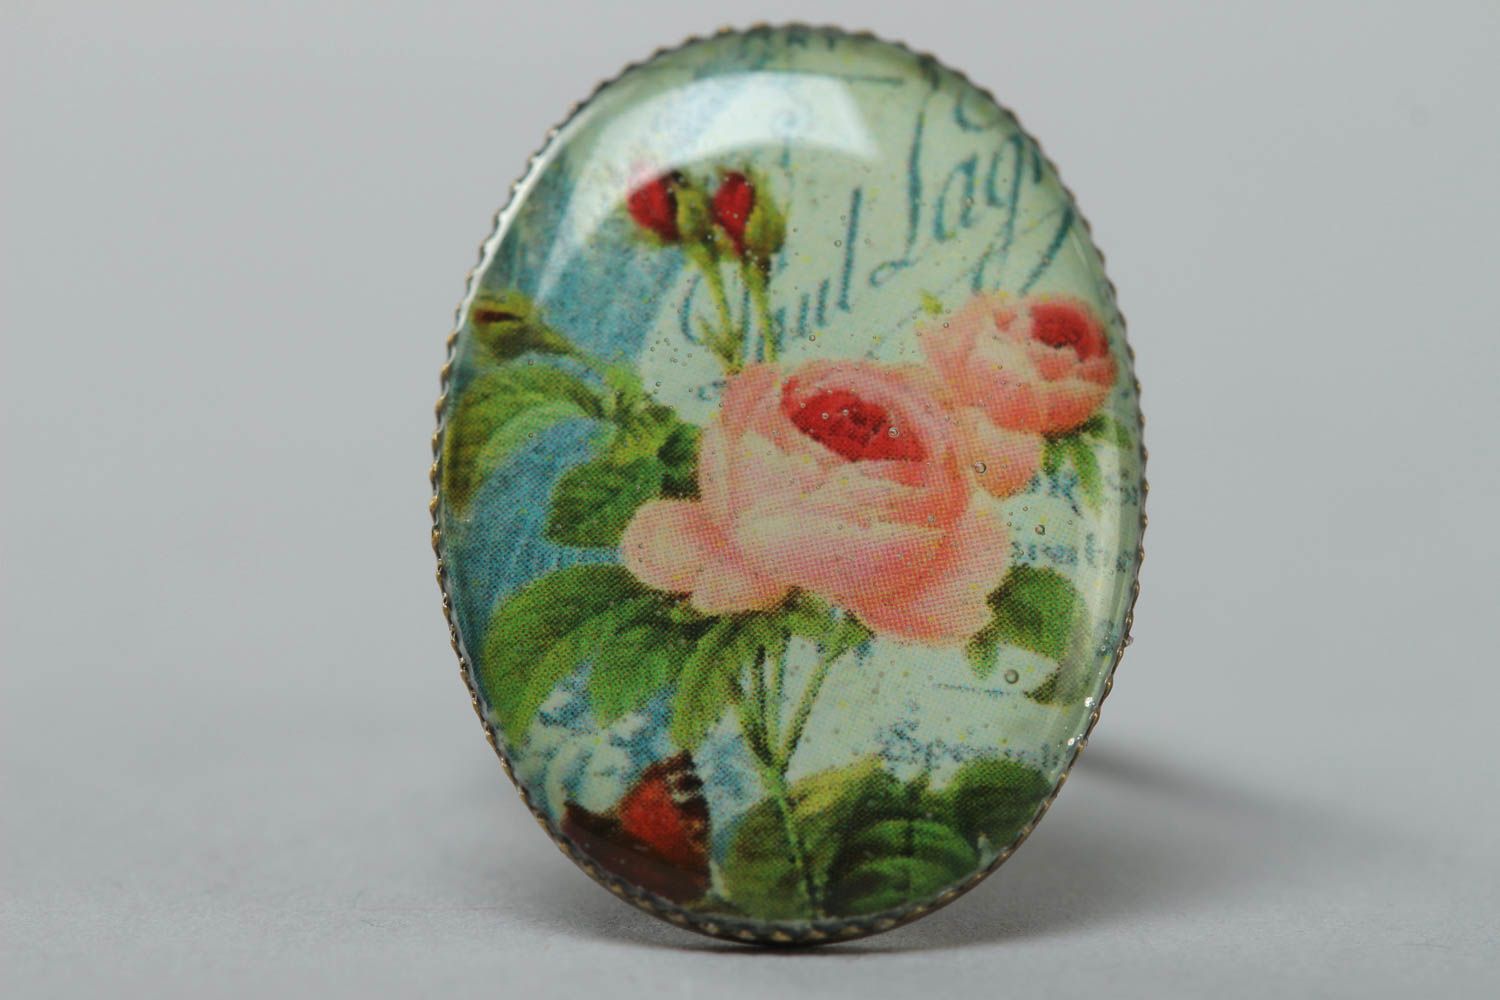 Handmade jewelry ring with metal basis and rose image coated with glass glaze photo 3